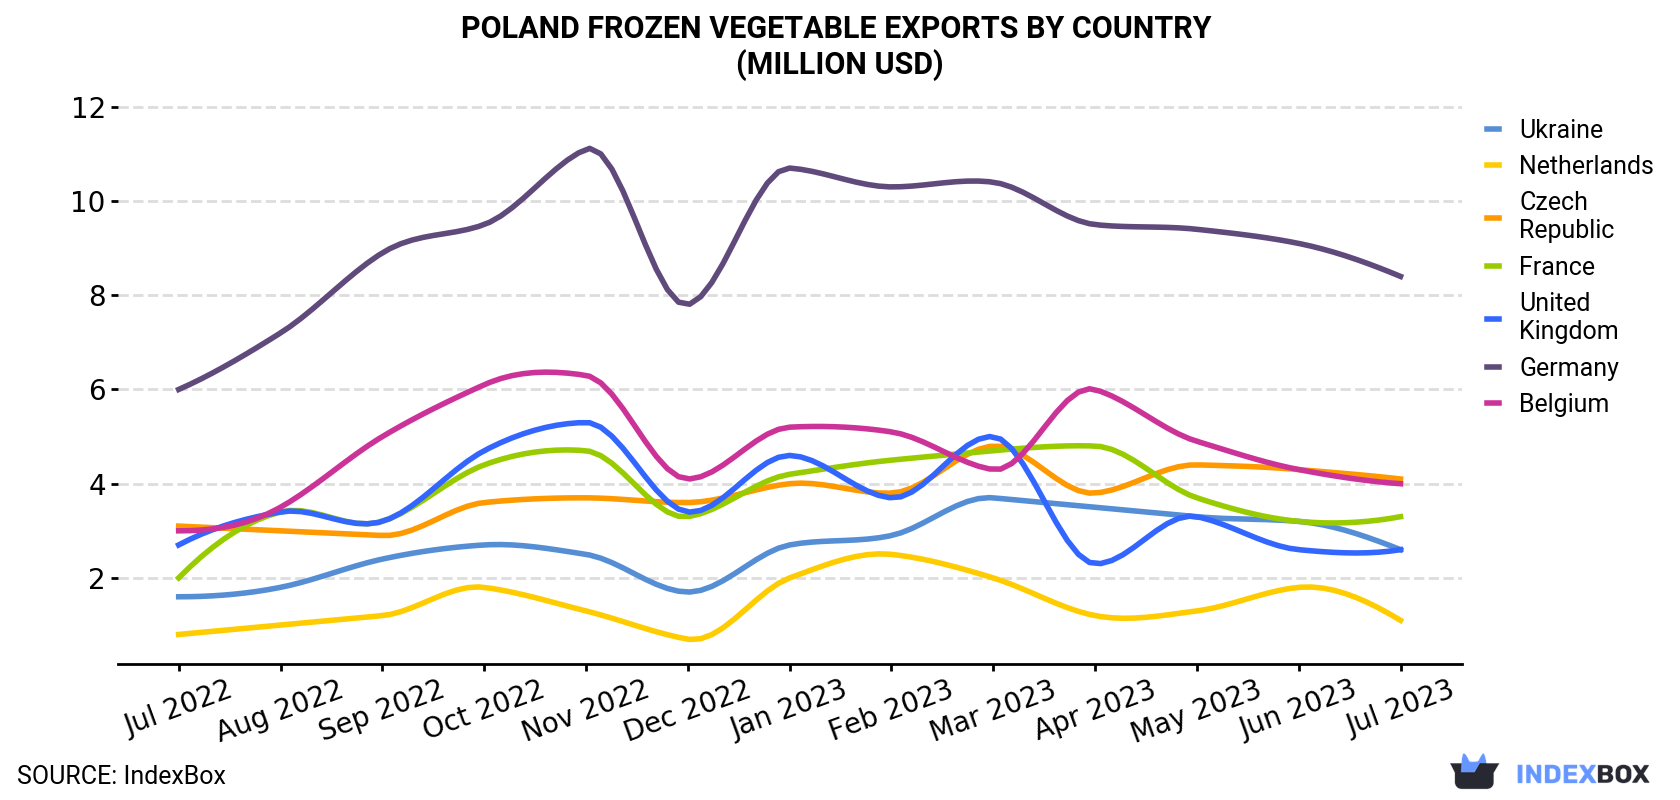 Poland Frozen Vegetable Exports By Country (Million USD)